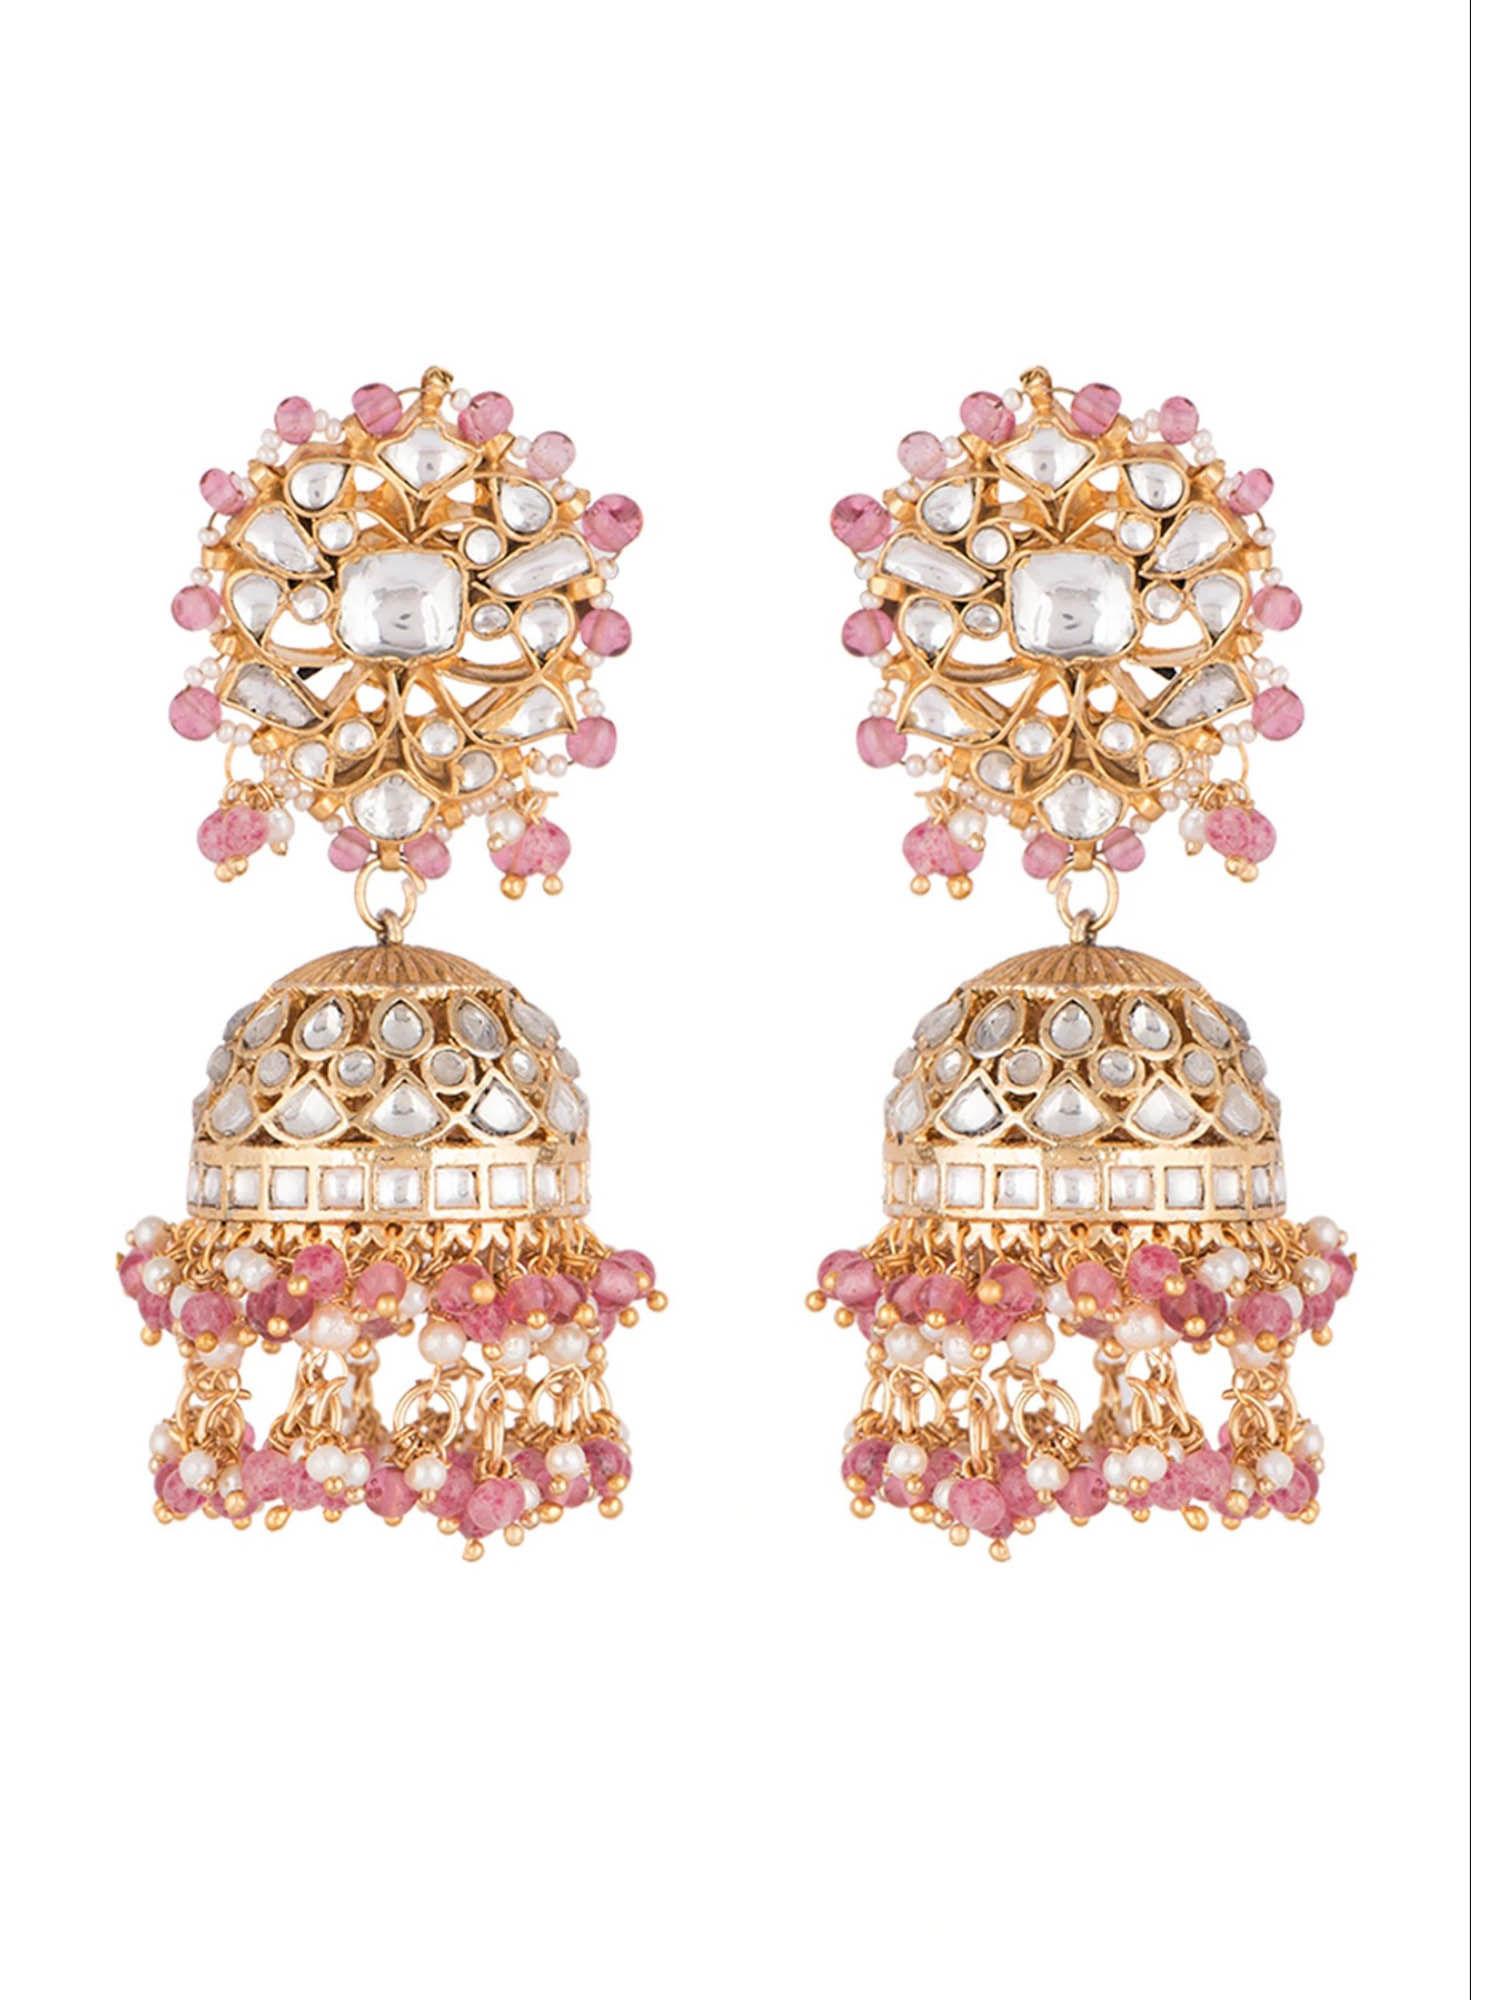 white jadtar stone jhumki earrings beaded with light pink beads and pearl